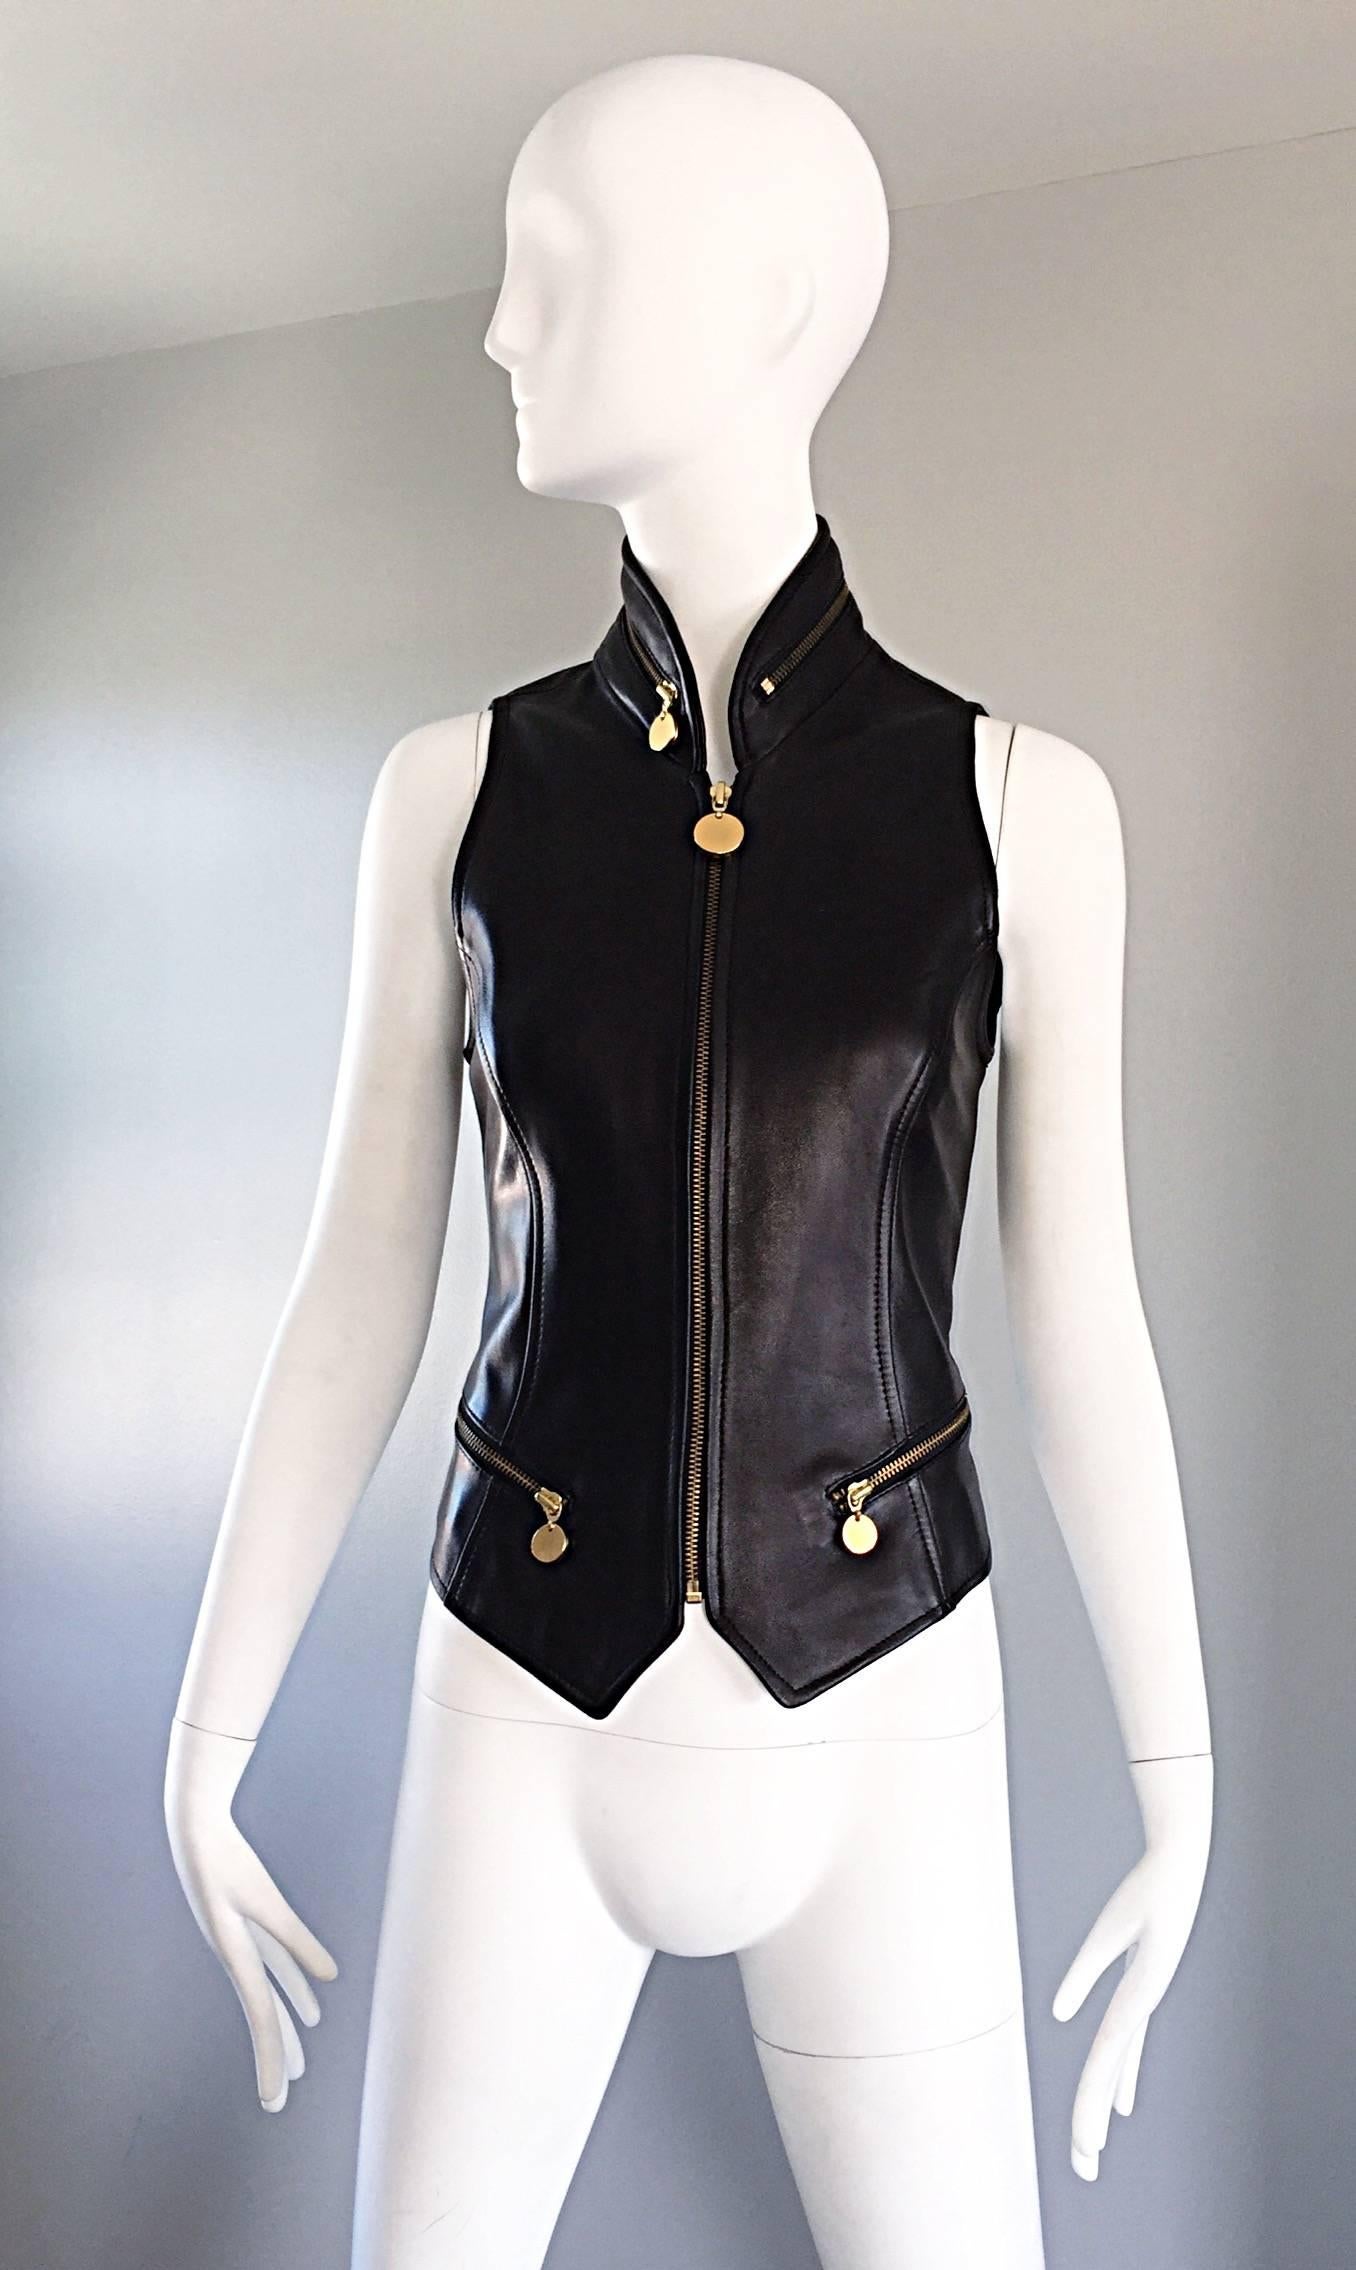 Chic vintage 1990s / 90s DONNA KARAN Black Label Lambskin black leather vest! Incredibly flattering tailored piece by this iconic designer. Features gold zipper up the bodice, two gold zippers at the front pockets, and a gold zippered pocket along